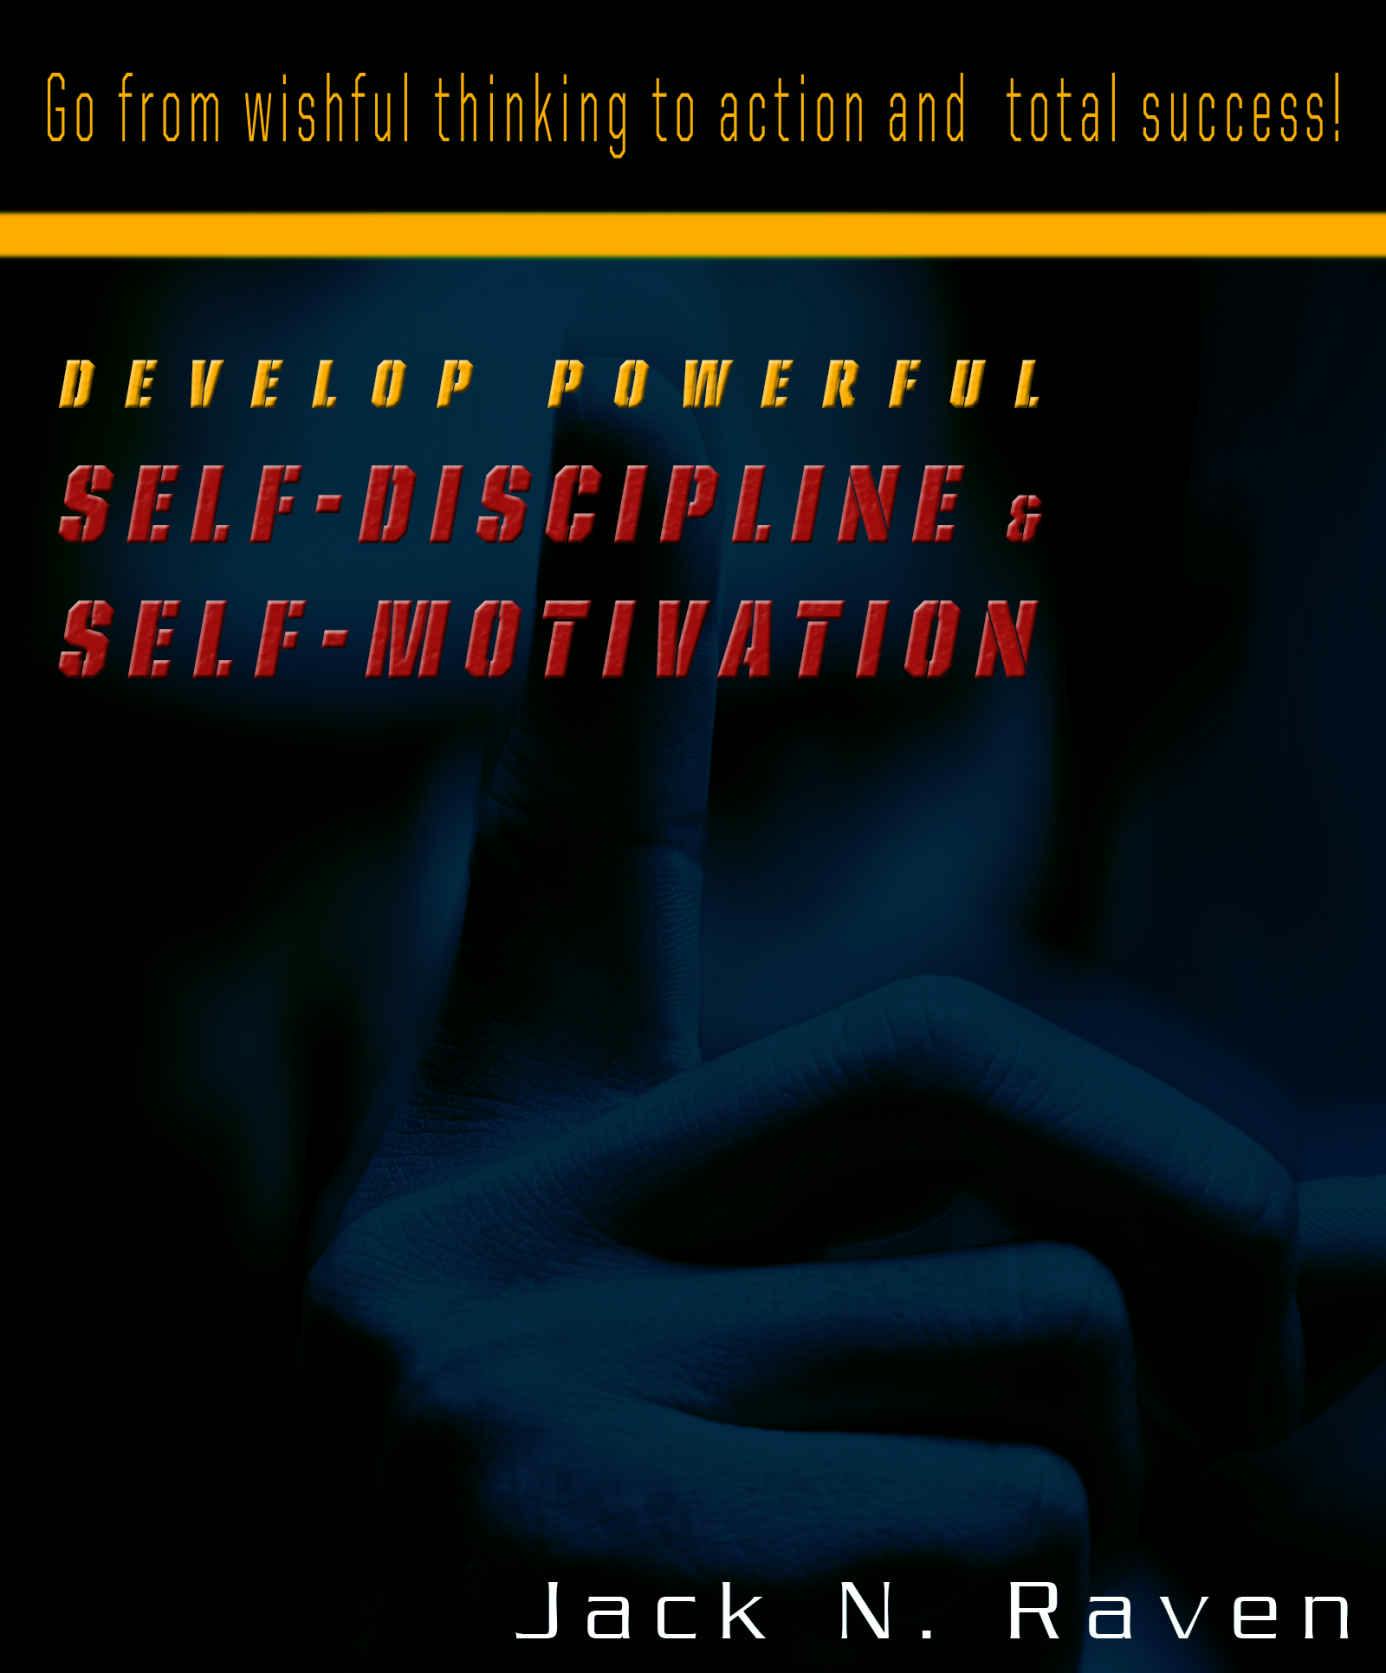 Develop Powerful Self-Discipline and Self-Motivation - Go From Wishful Thinking to Action and Total Success! - Jack N. Raven